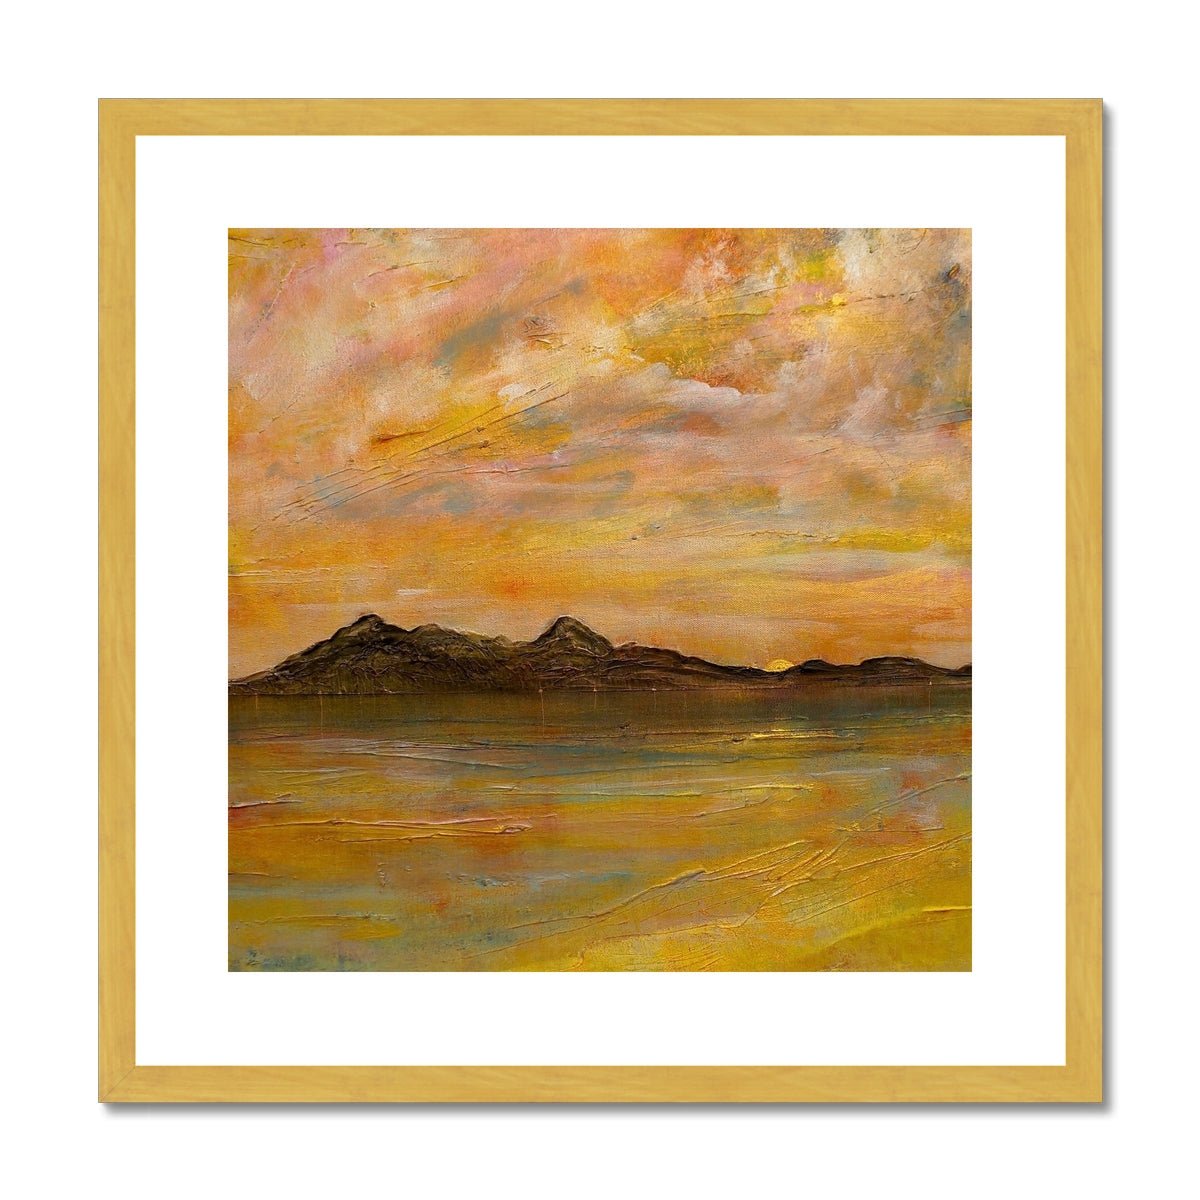 Arran Dusk Painting | Antique Framed & Mounted Prints From Scotland-Antique Framed & Mounted Prints-Arran Art Gallery-20"x20"-Gold Frame-Paintings, Prints, Homeware, Art Gifts From Scotland By Scottish Artist Kevin Hunter